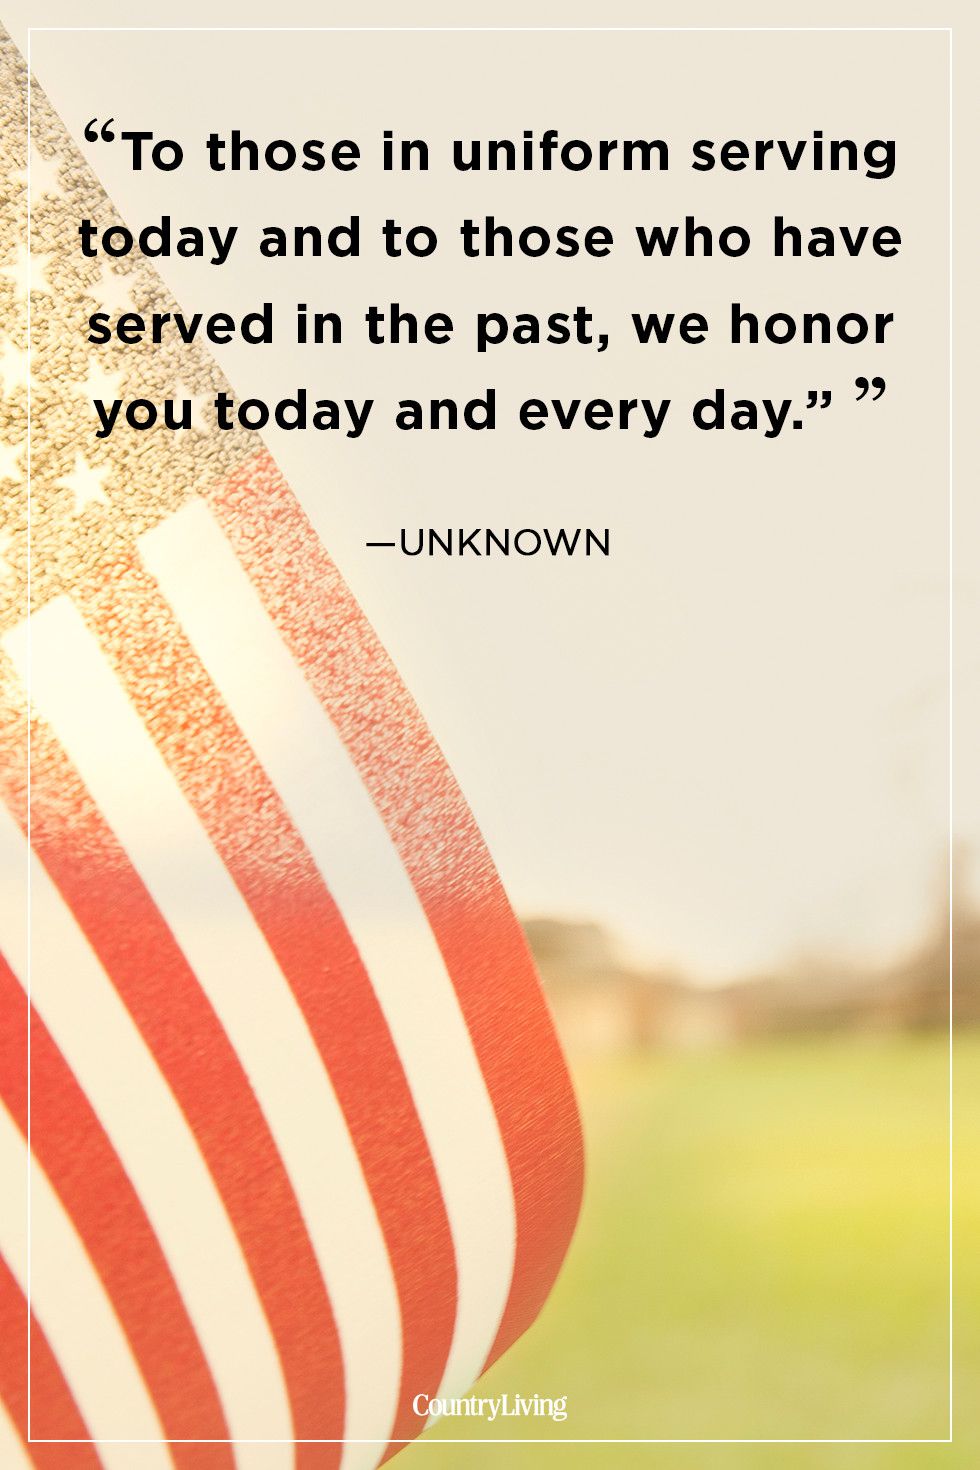 80 Best Collection Of Memorial Day Quotes And Sayings